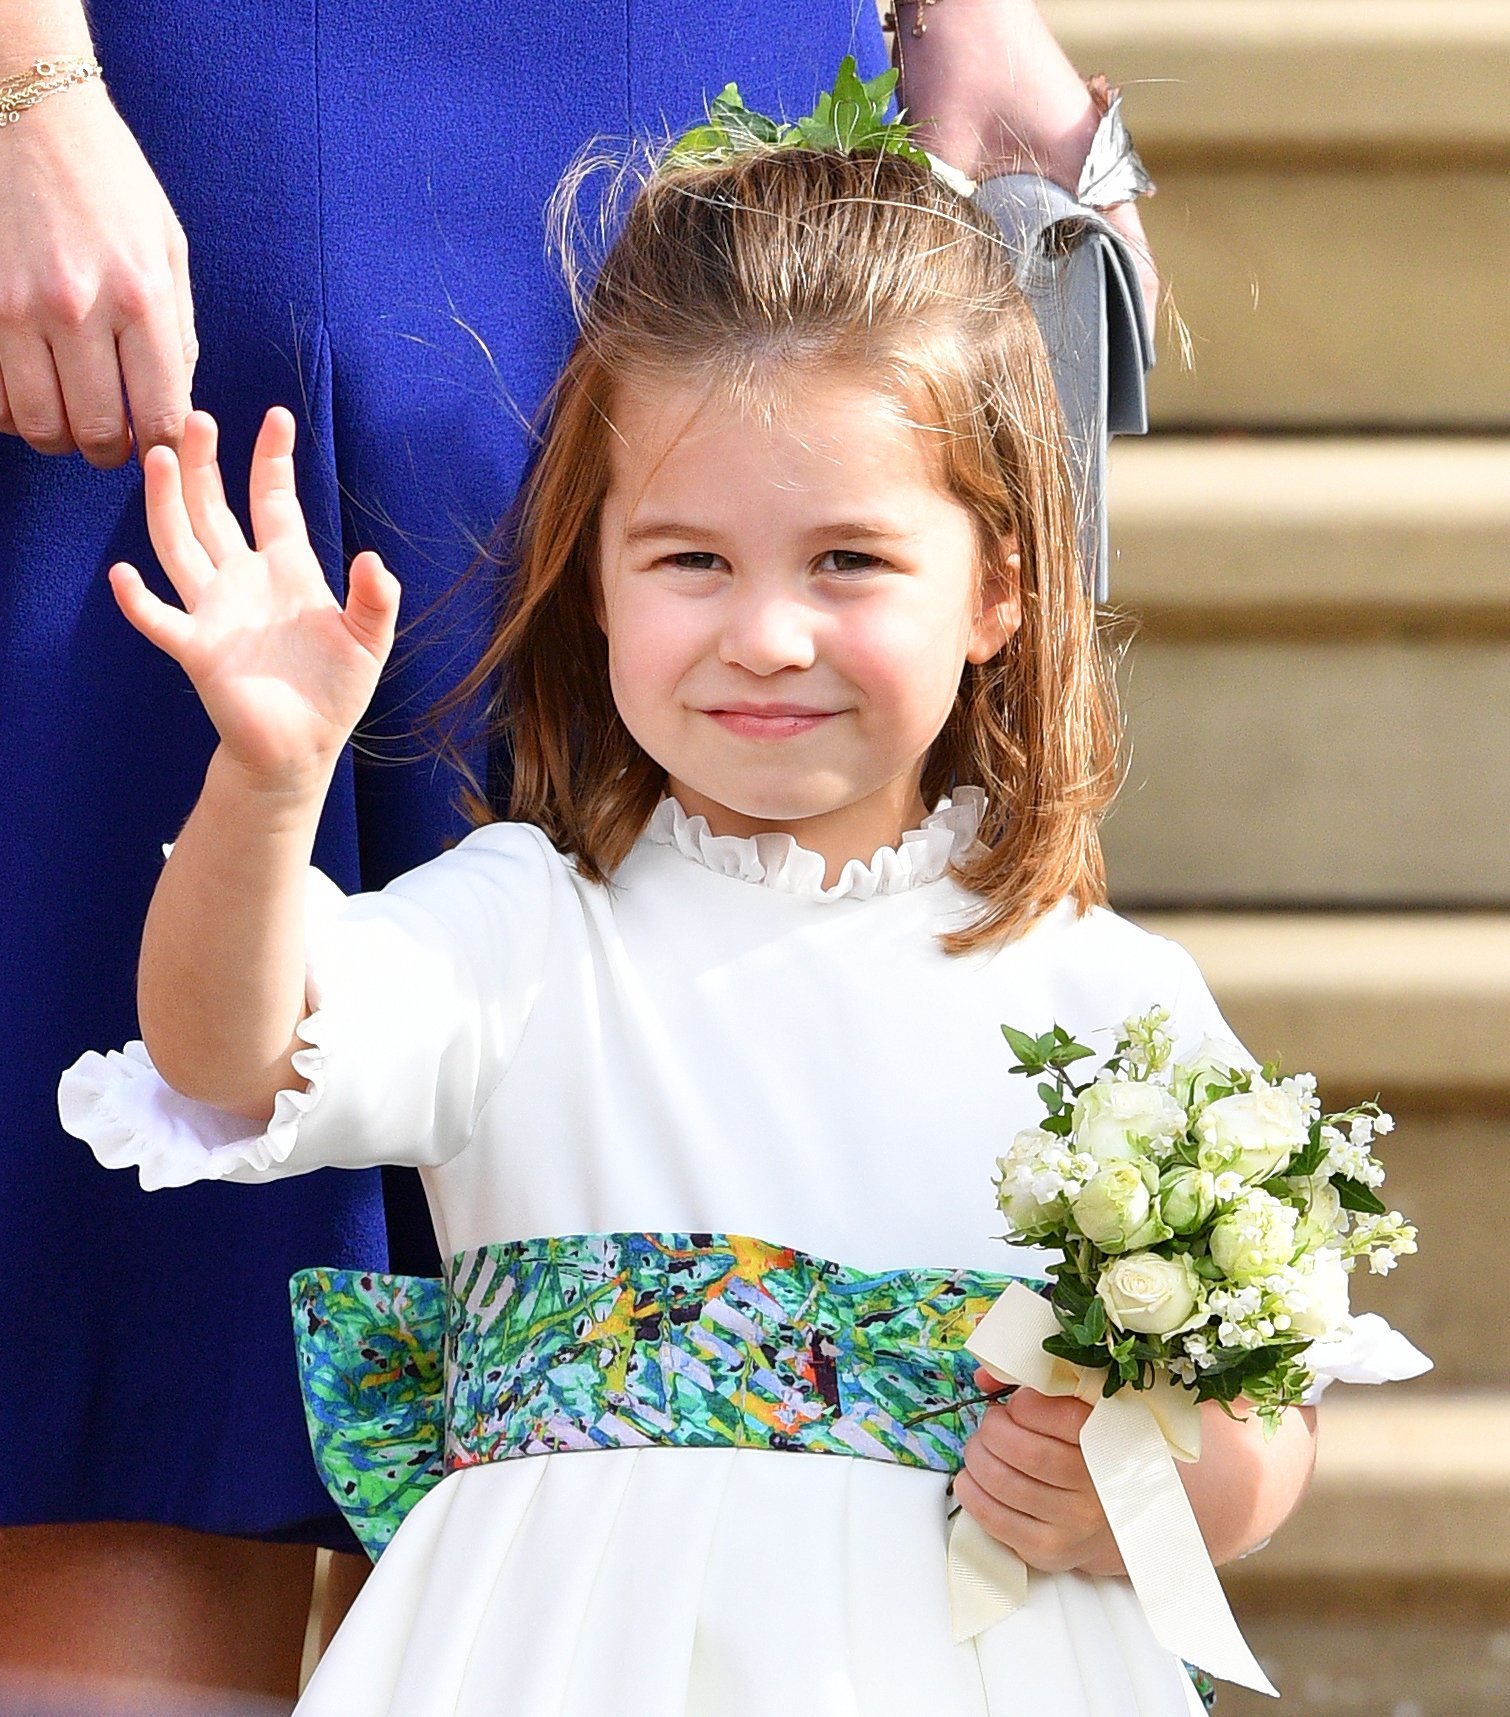 Princess Charlotte at the wedding of Princess Eugenie and Jack Brooksbank at St George's Chapel on October 12, 2018 in Windsor, England | Photo: Getty Images